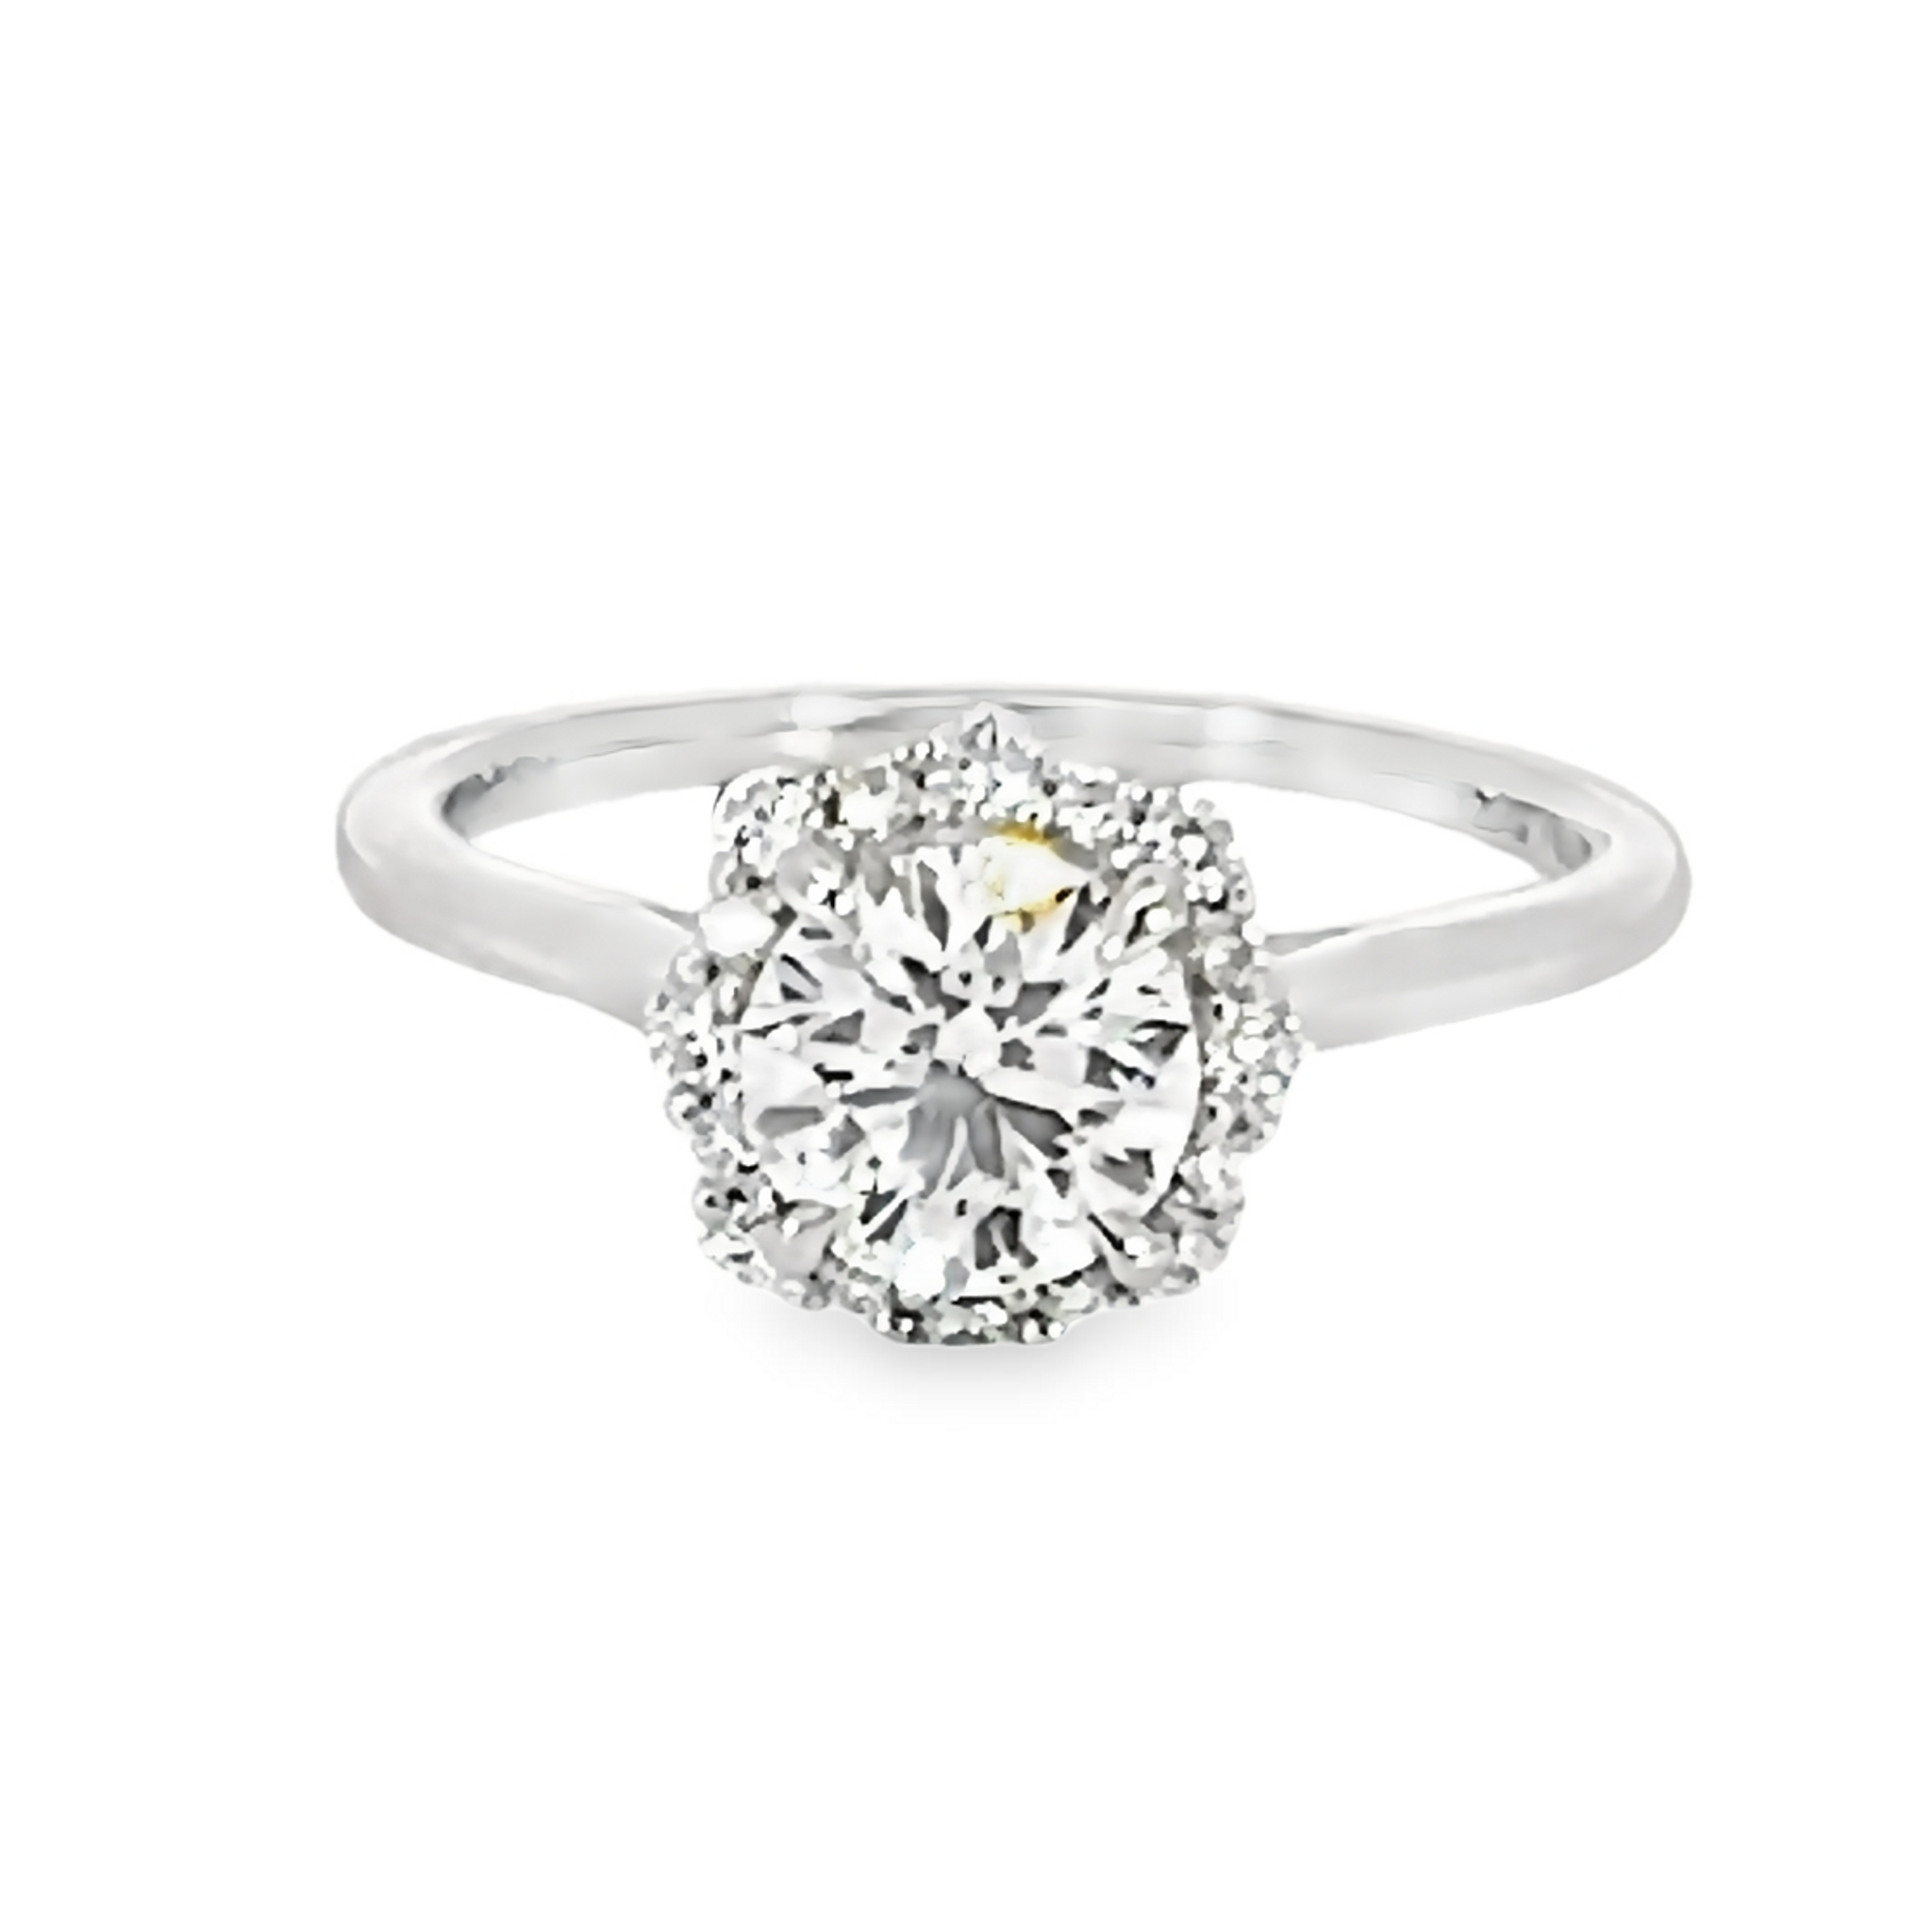 Round Brilliant Solitaire Diamond Engagement Ring With Halo